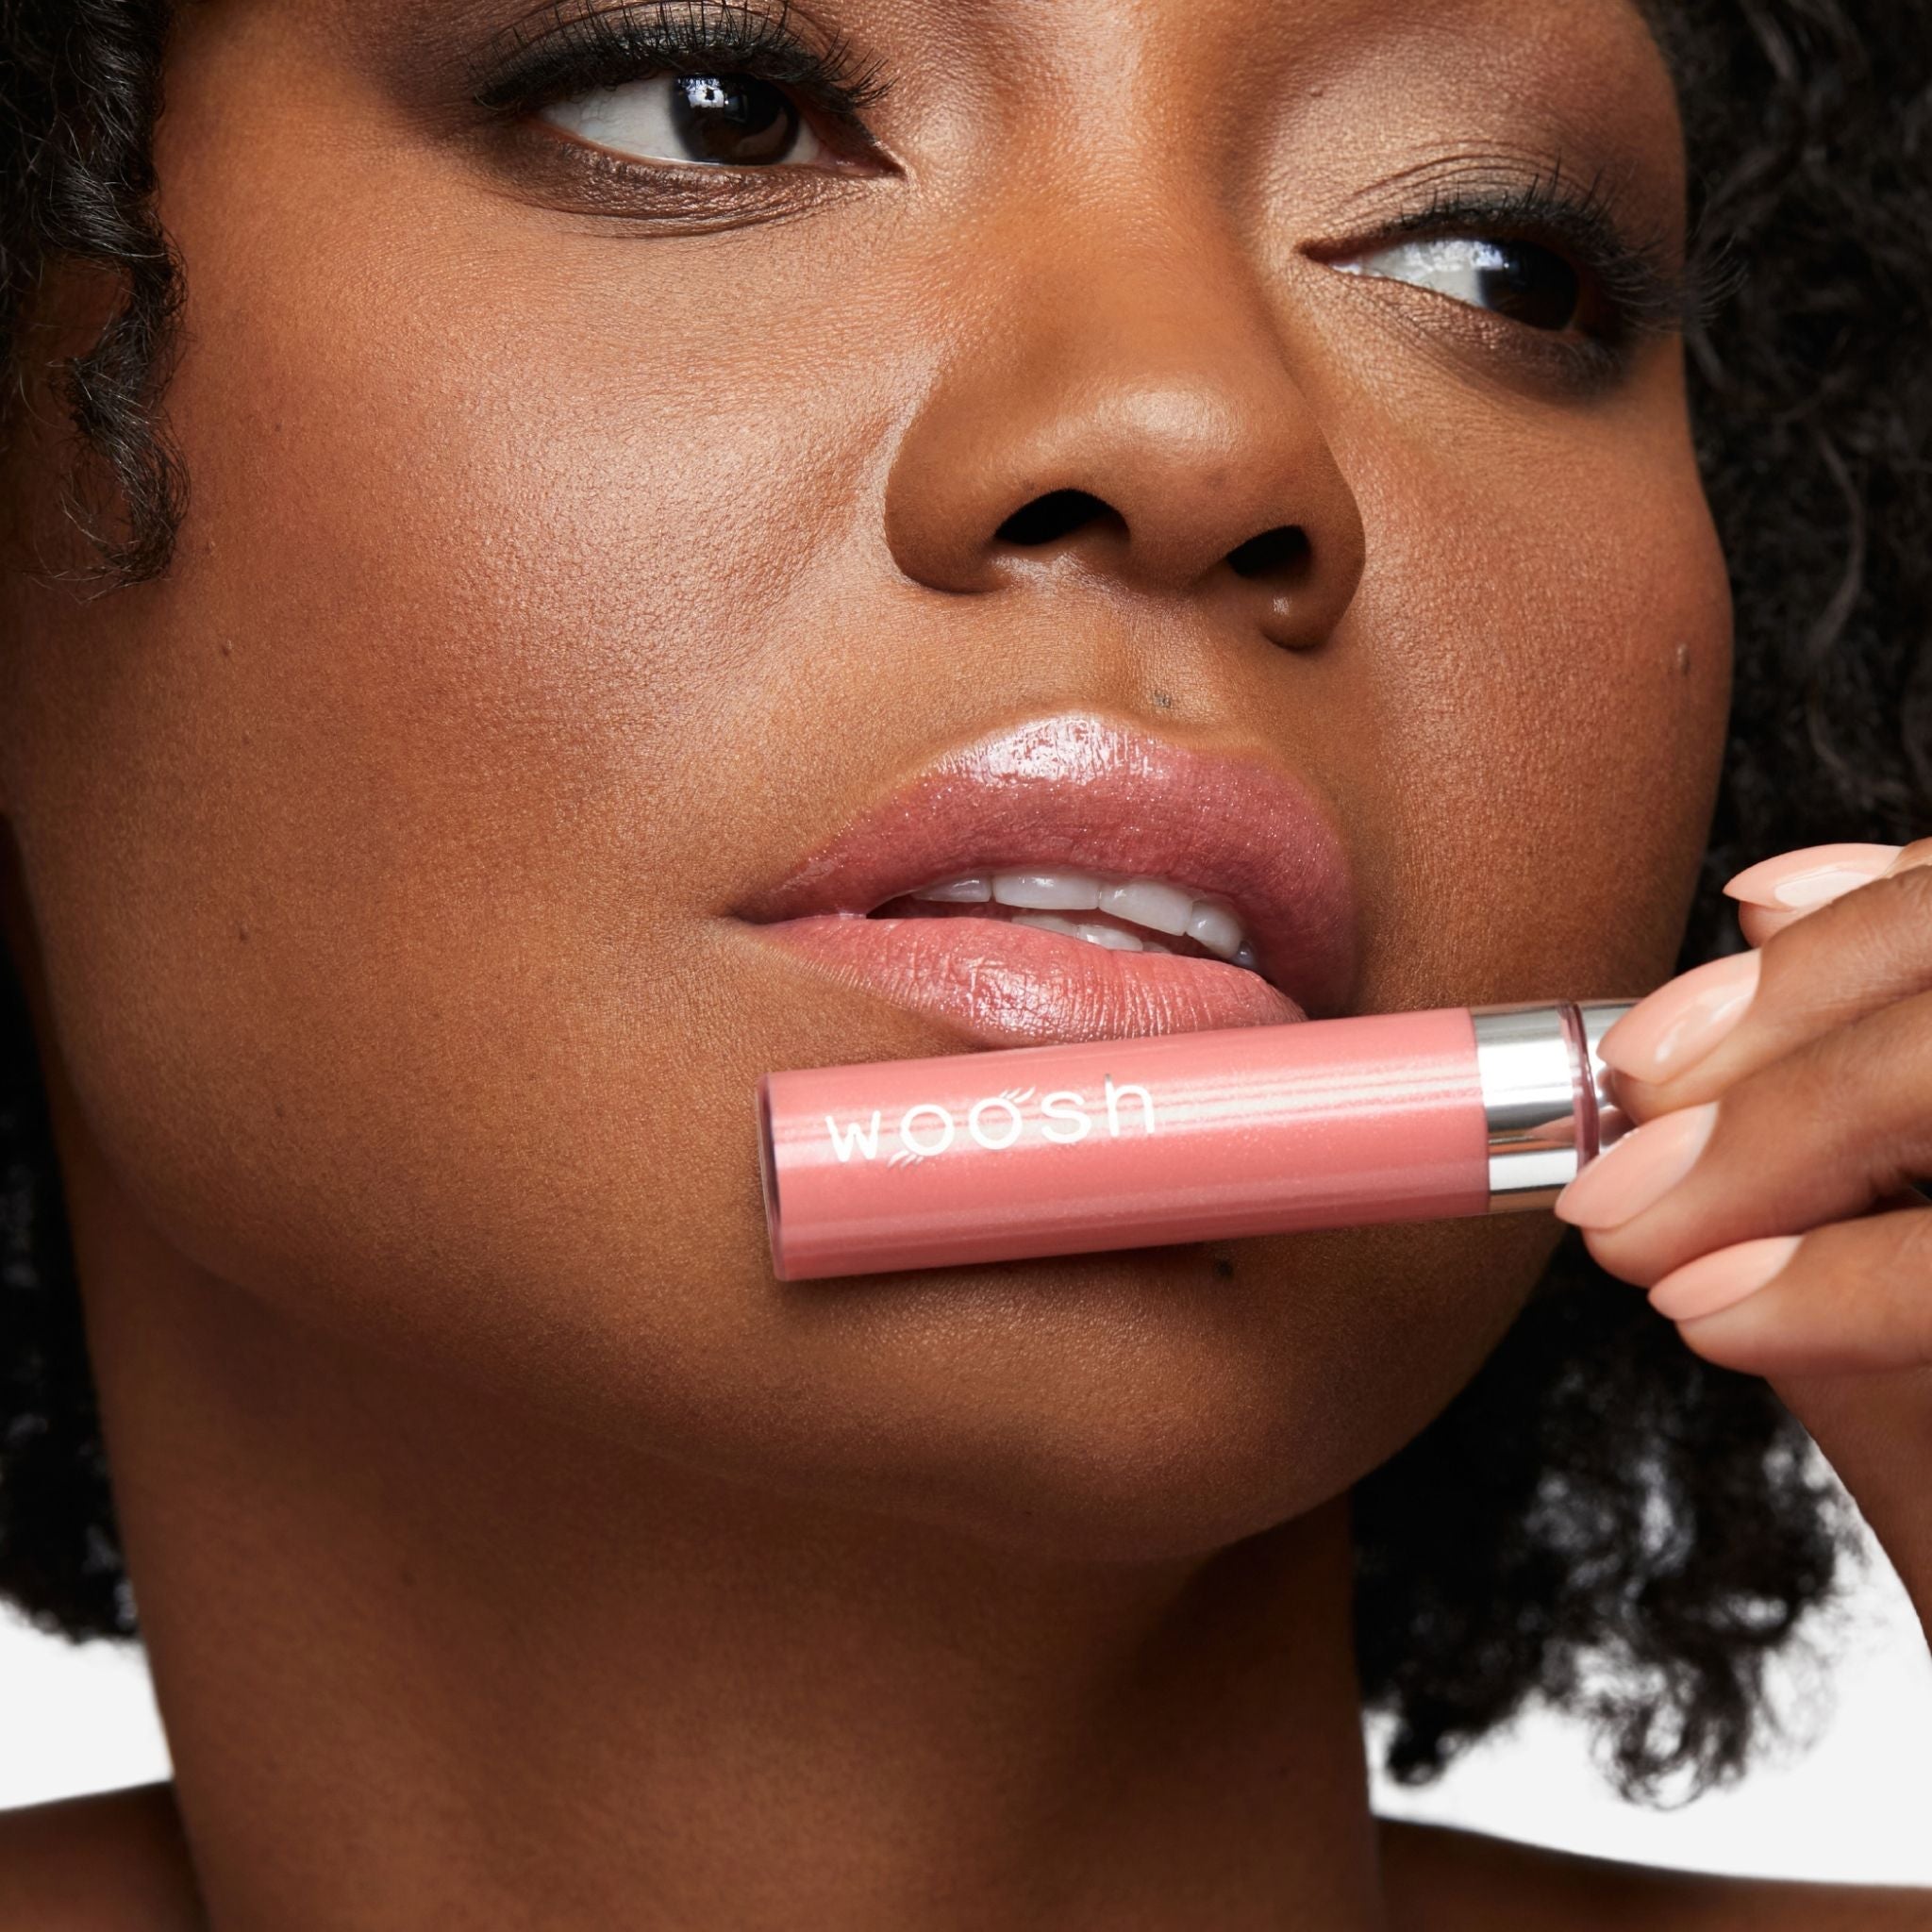 Previously known as glam peach, glimmer is now infused with shea butter and hyaluronic acid. The perfect peach shade with sparkles. Photo of model holding bottle close to lip.